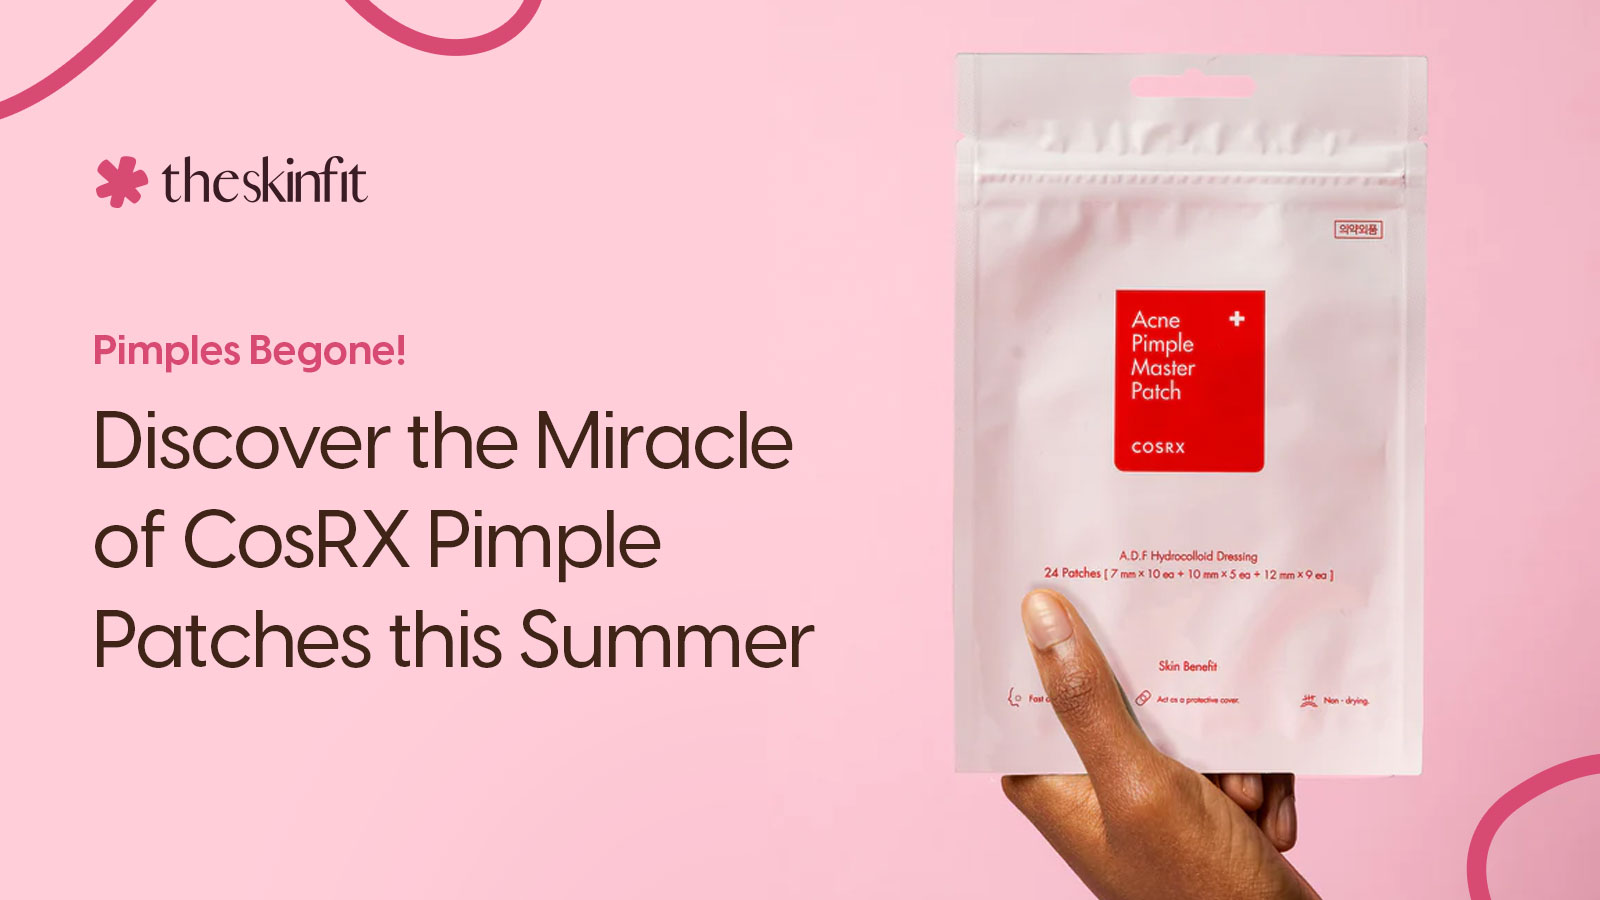 Pimples Begone! Discover the Miracle of CosRX Pimple Patches this Summer